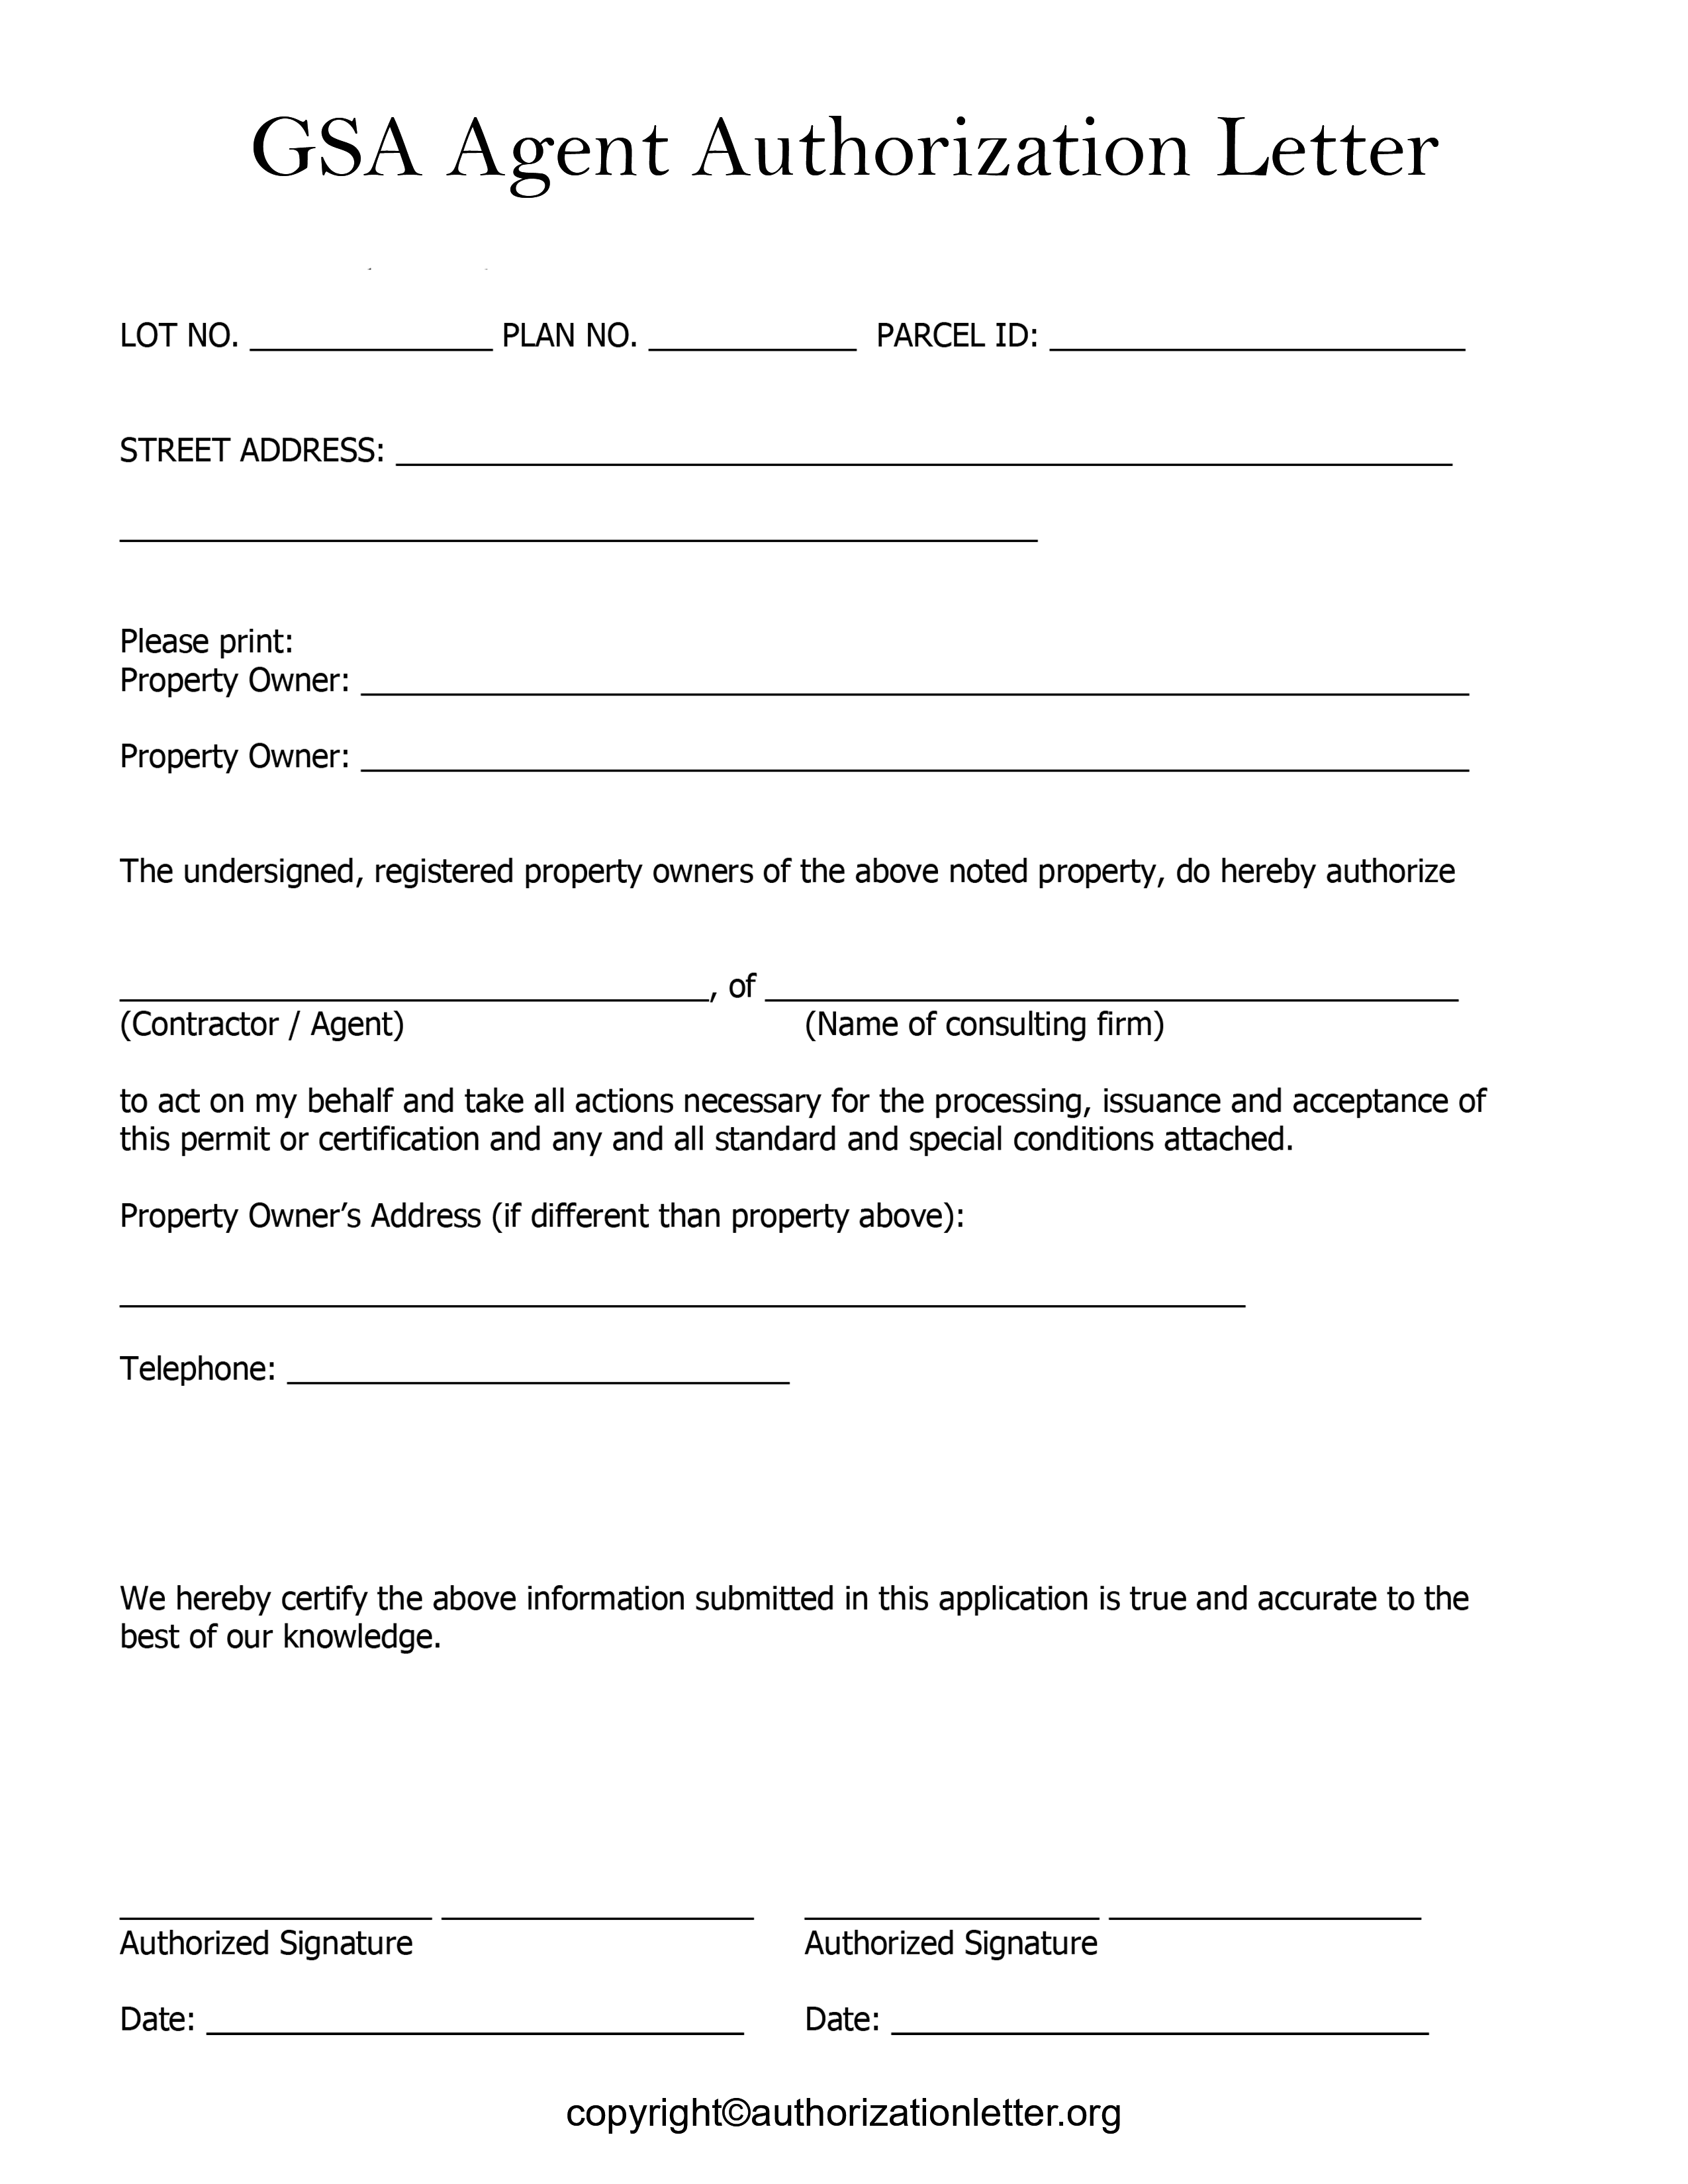 Printable GSA Letter of Authorization Template